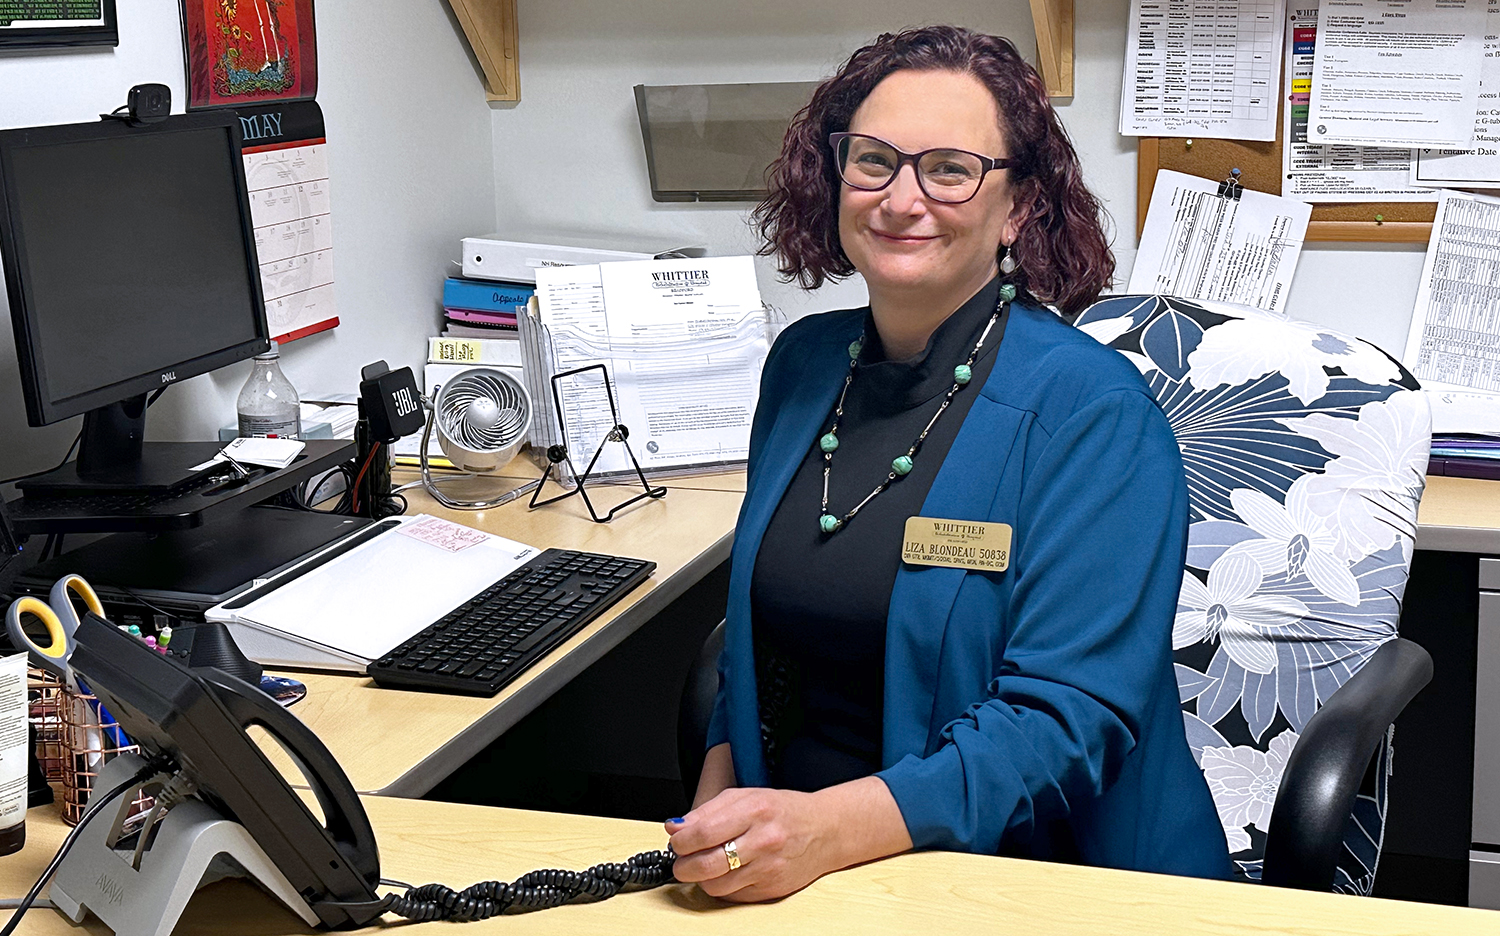 Elizabeth Blondeau, Director of Case Management at Whittier Rehabilitation Hospital-Bradford, with advice for success – for patients and case managers.